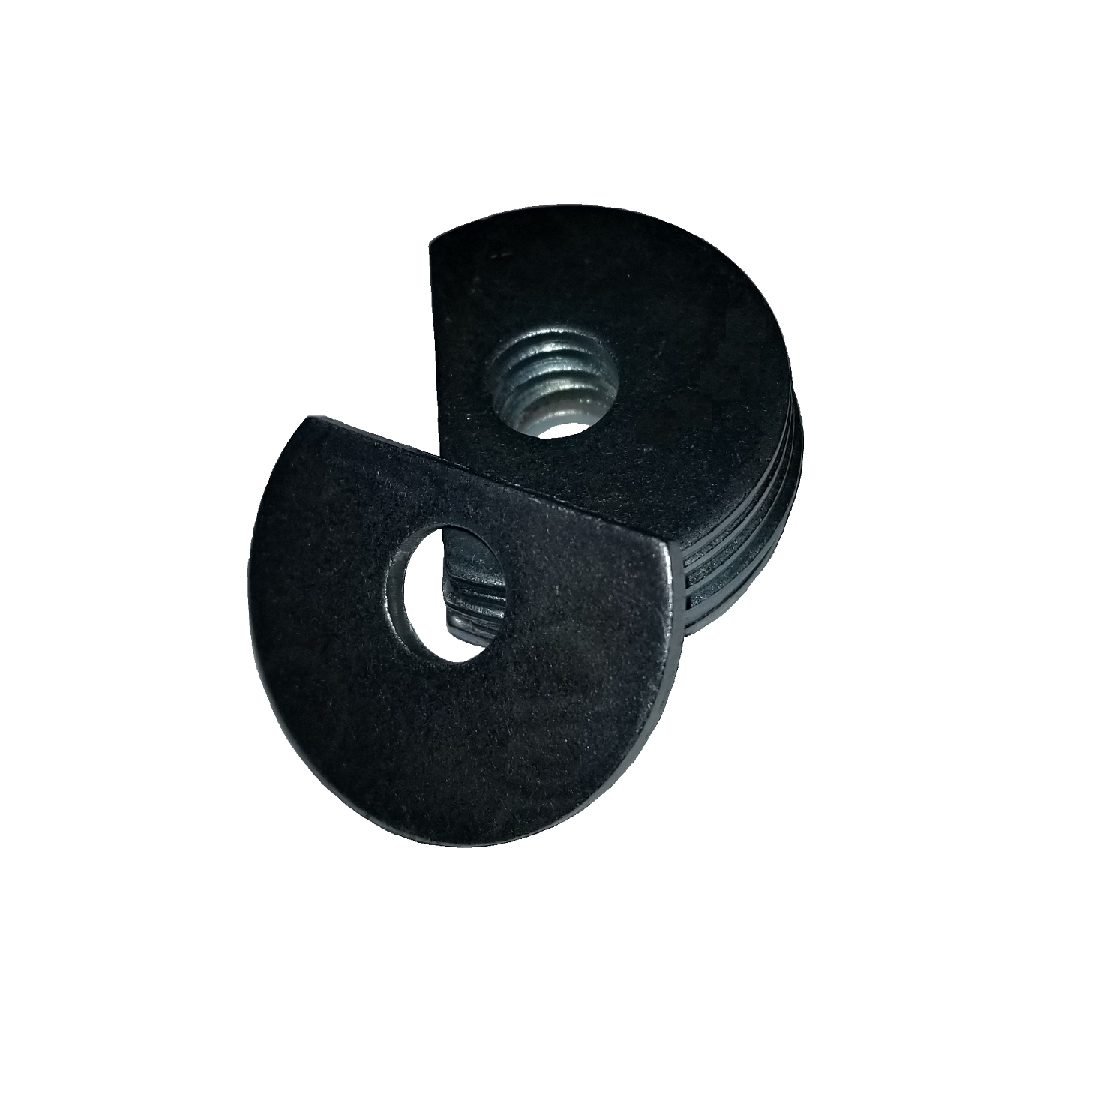 Clipped OD Washer - 0.493 ID, 0.926 OD, 0.080 Thick, Spring Steel - Hard